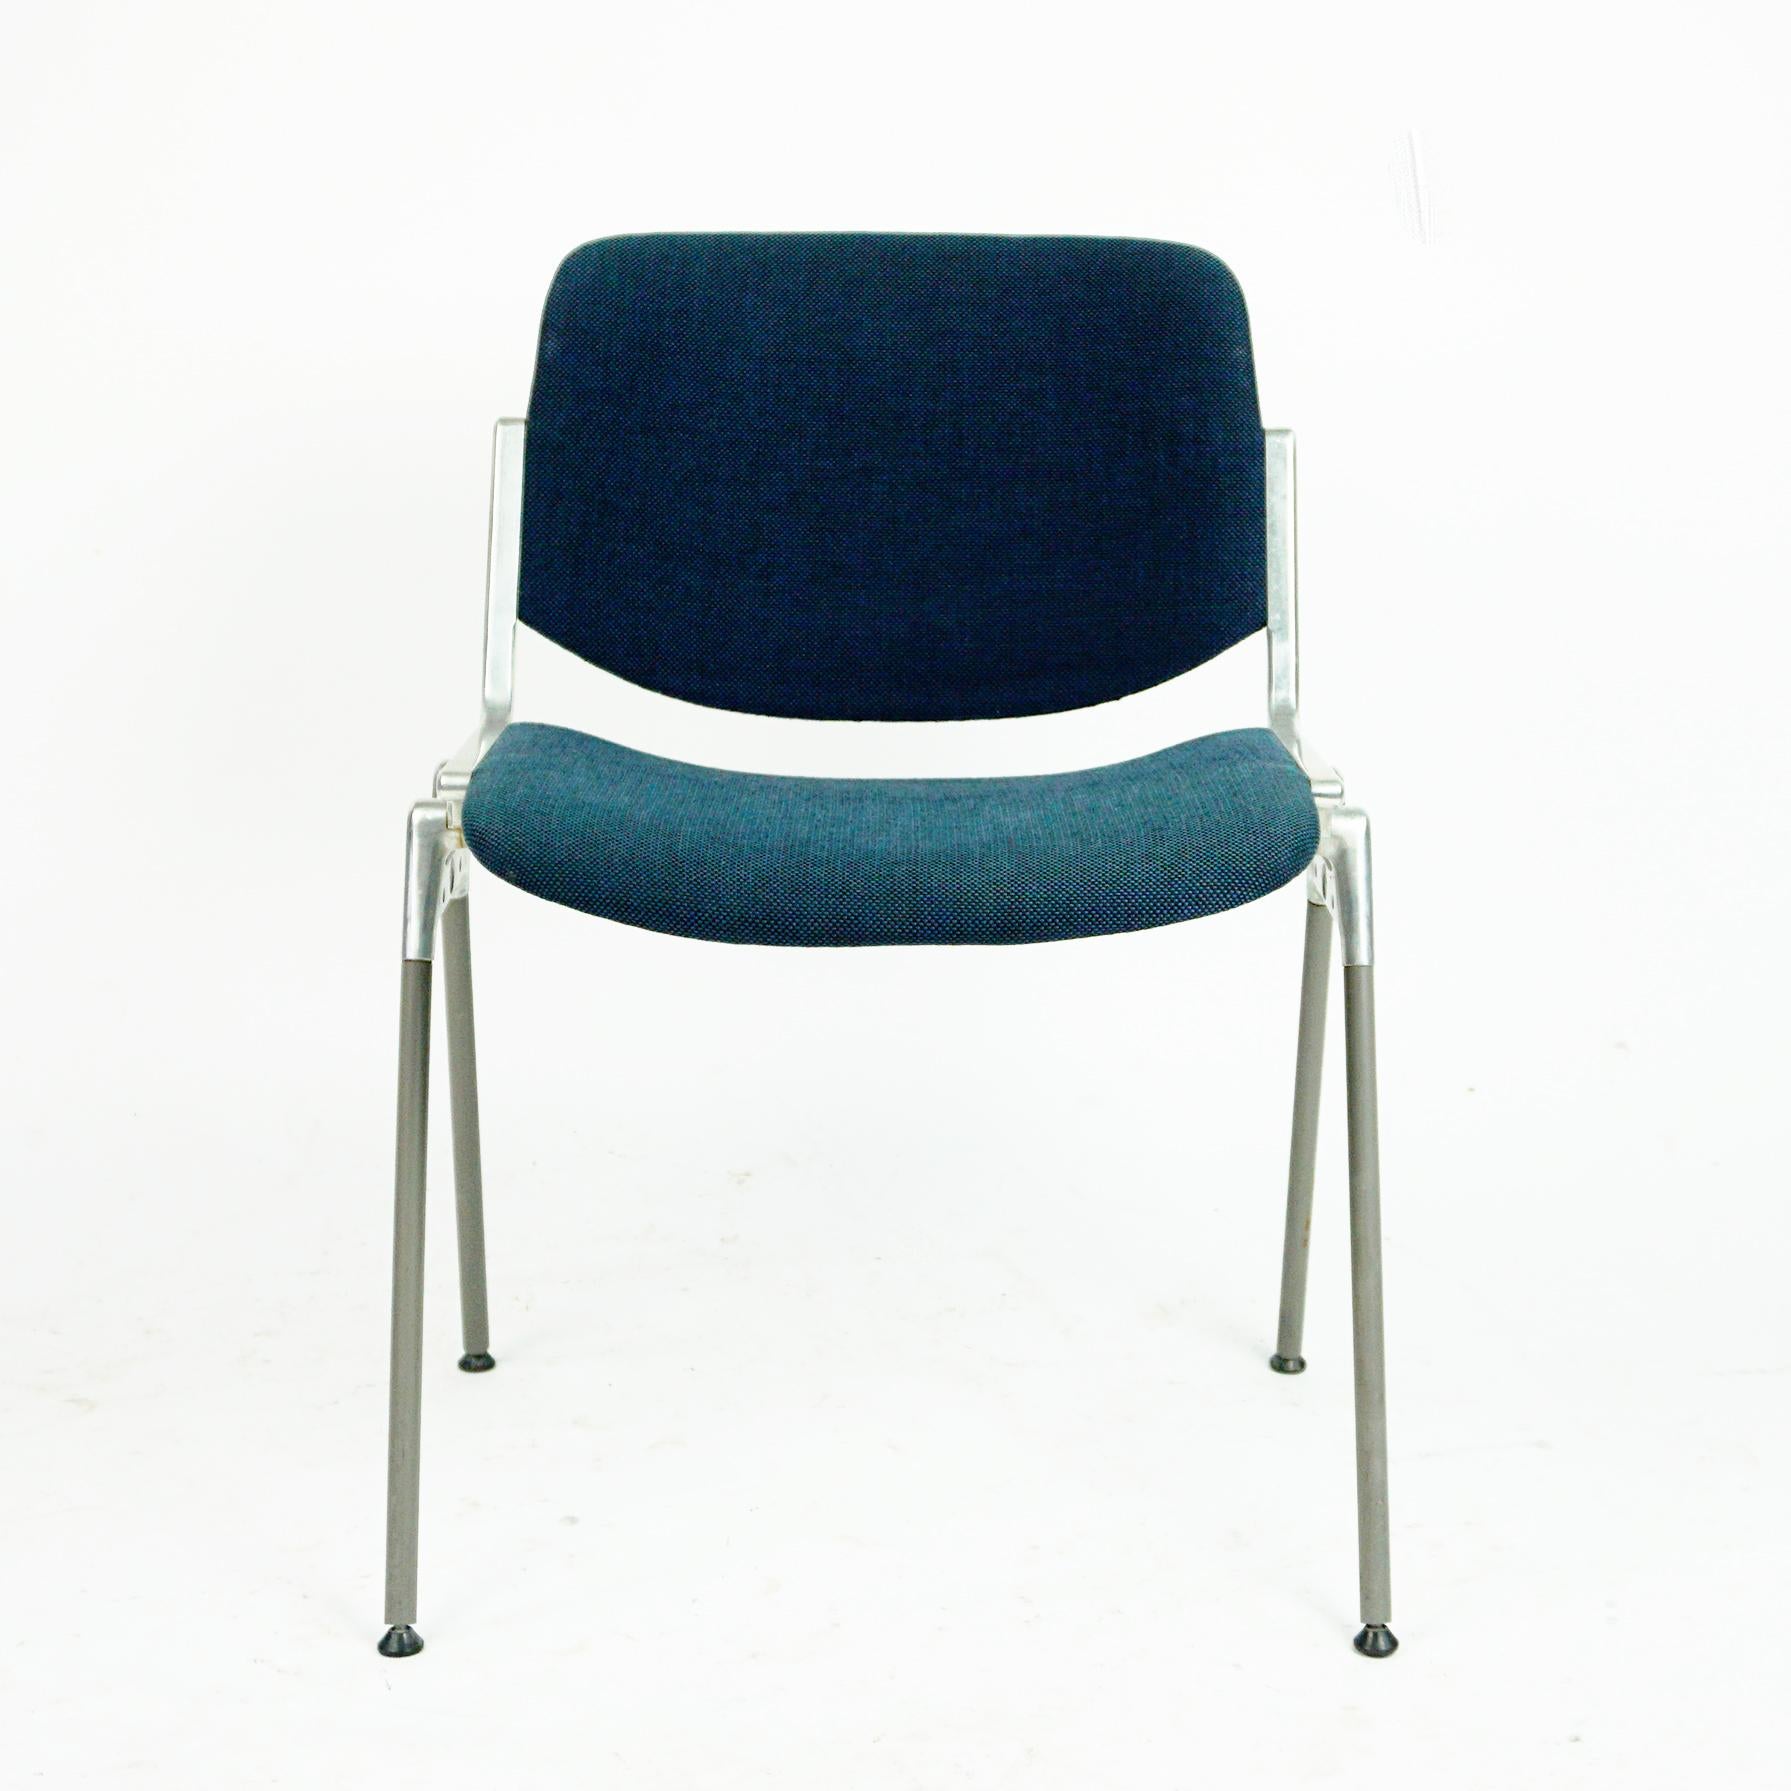 Mid-Century Modern Set of Four Blue Castelli Dsc 106 Stacking Chairs by Giancarlo Piretti, Italy For Sale